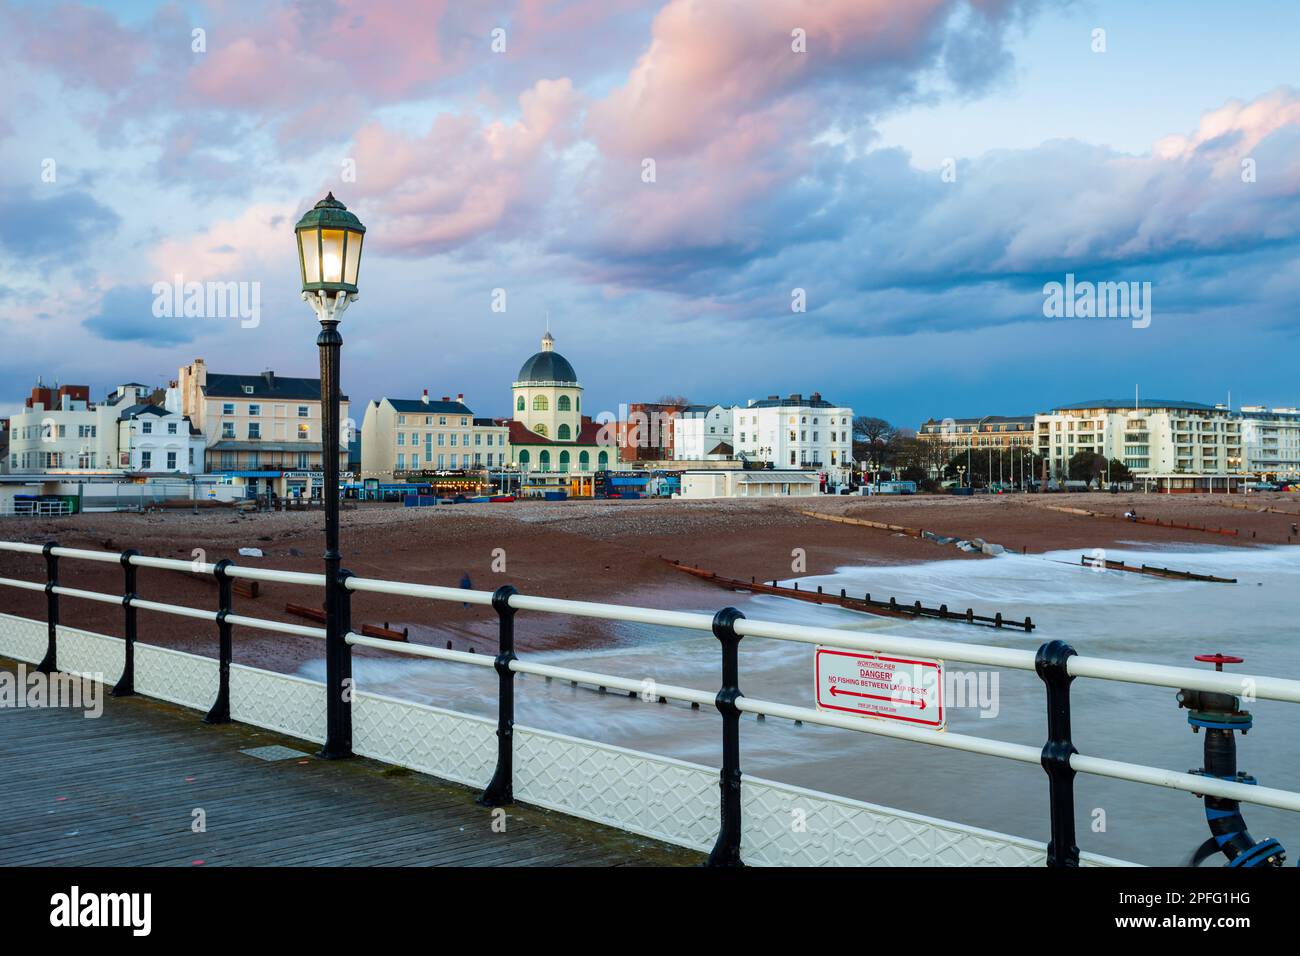 Evening on Worthing Pier, West Sussex, England. Stock Photo